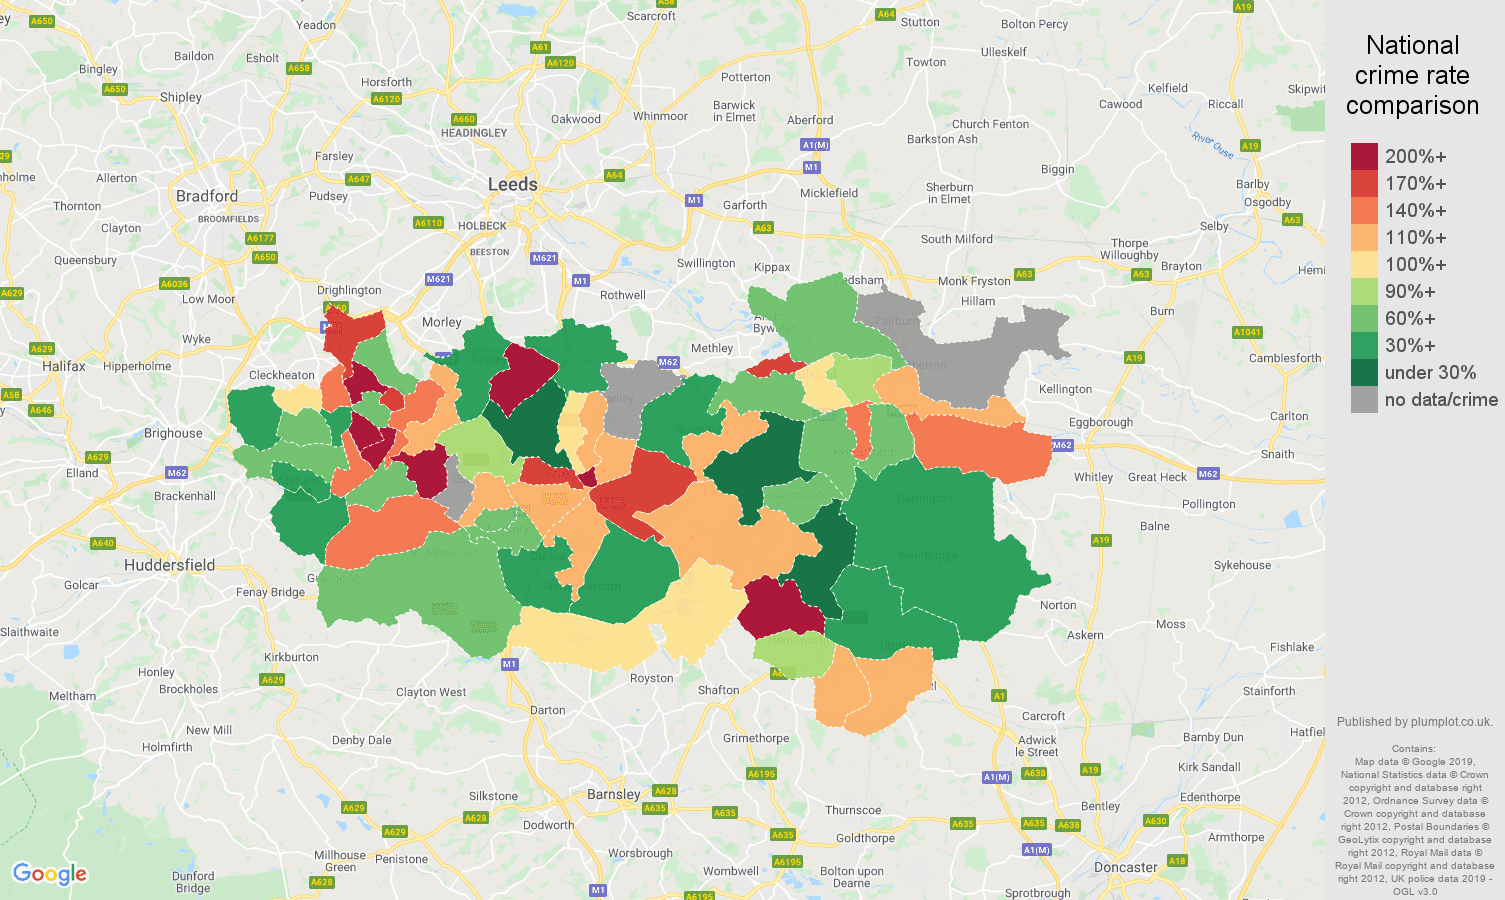 Wakefield possession of weapons crime rate comparison map